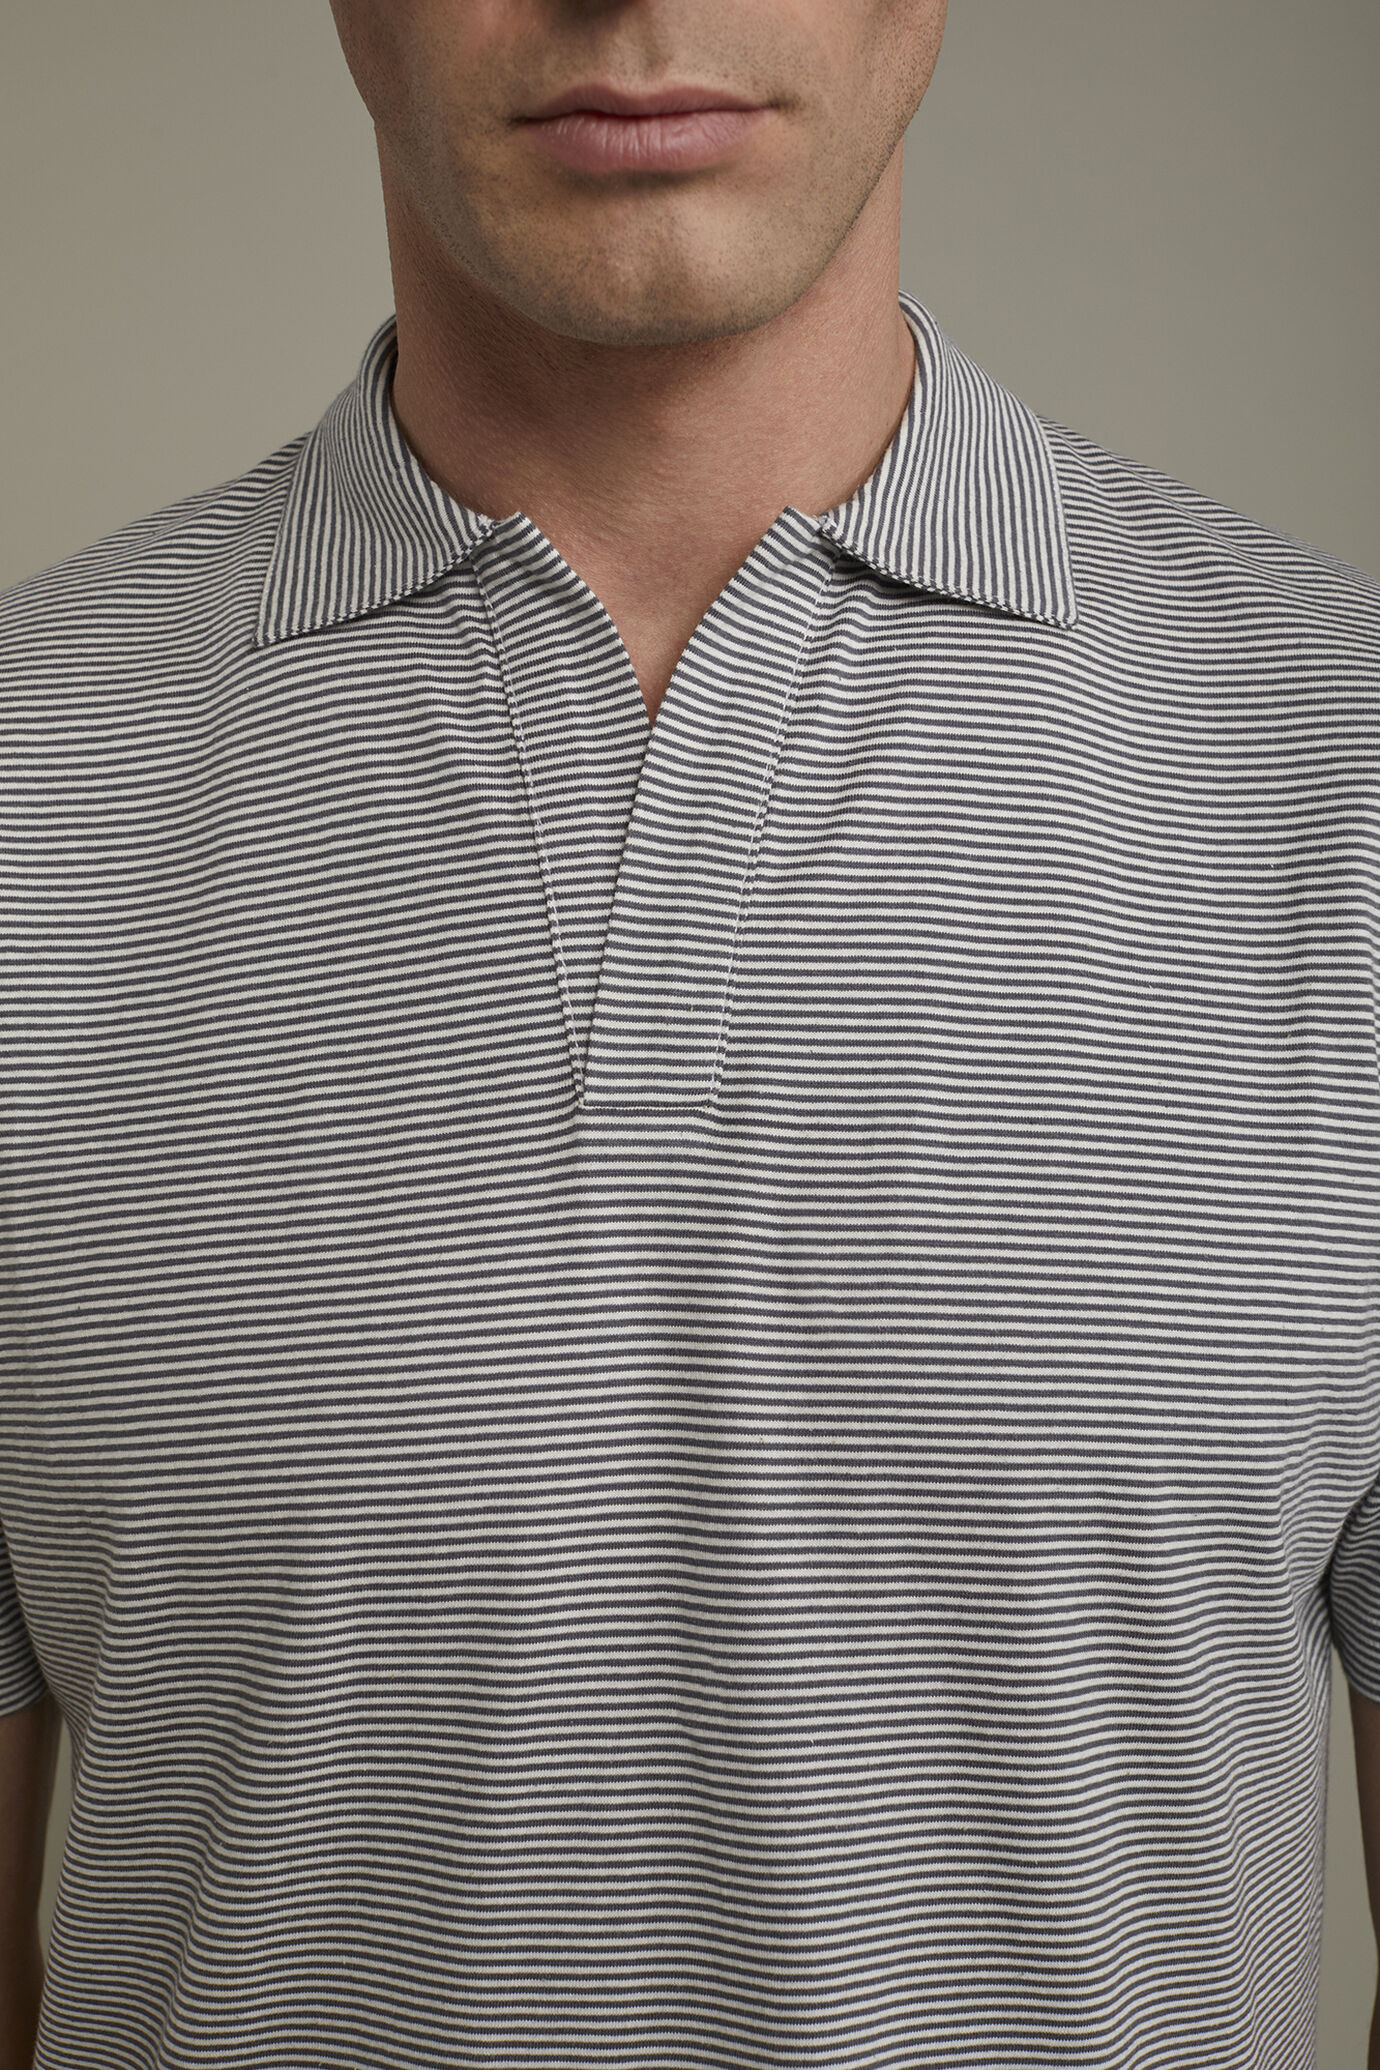 Men’s short sleeve button-less polo shirt with derby collar and thin stripes 100% cotton regular fit image number 3